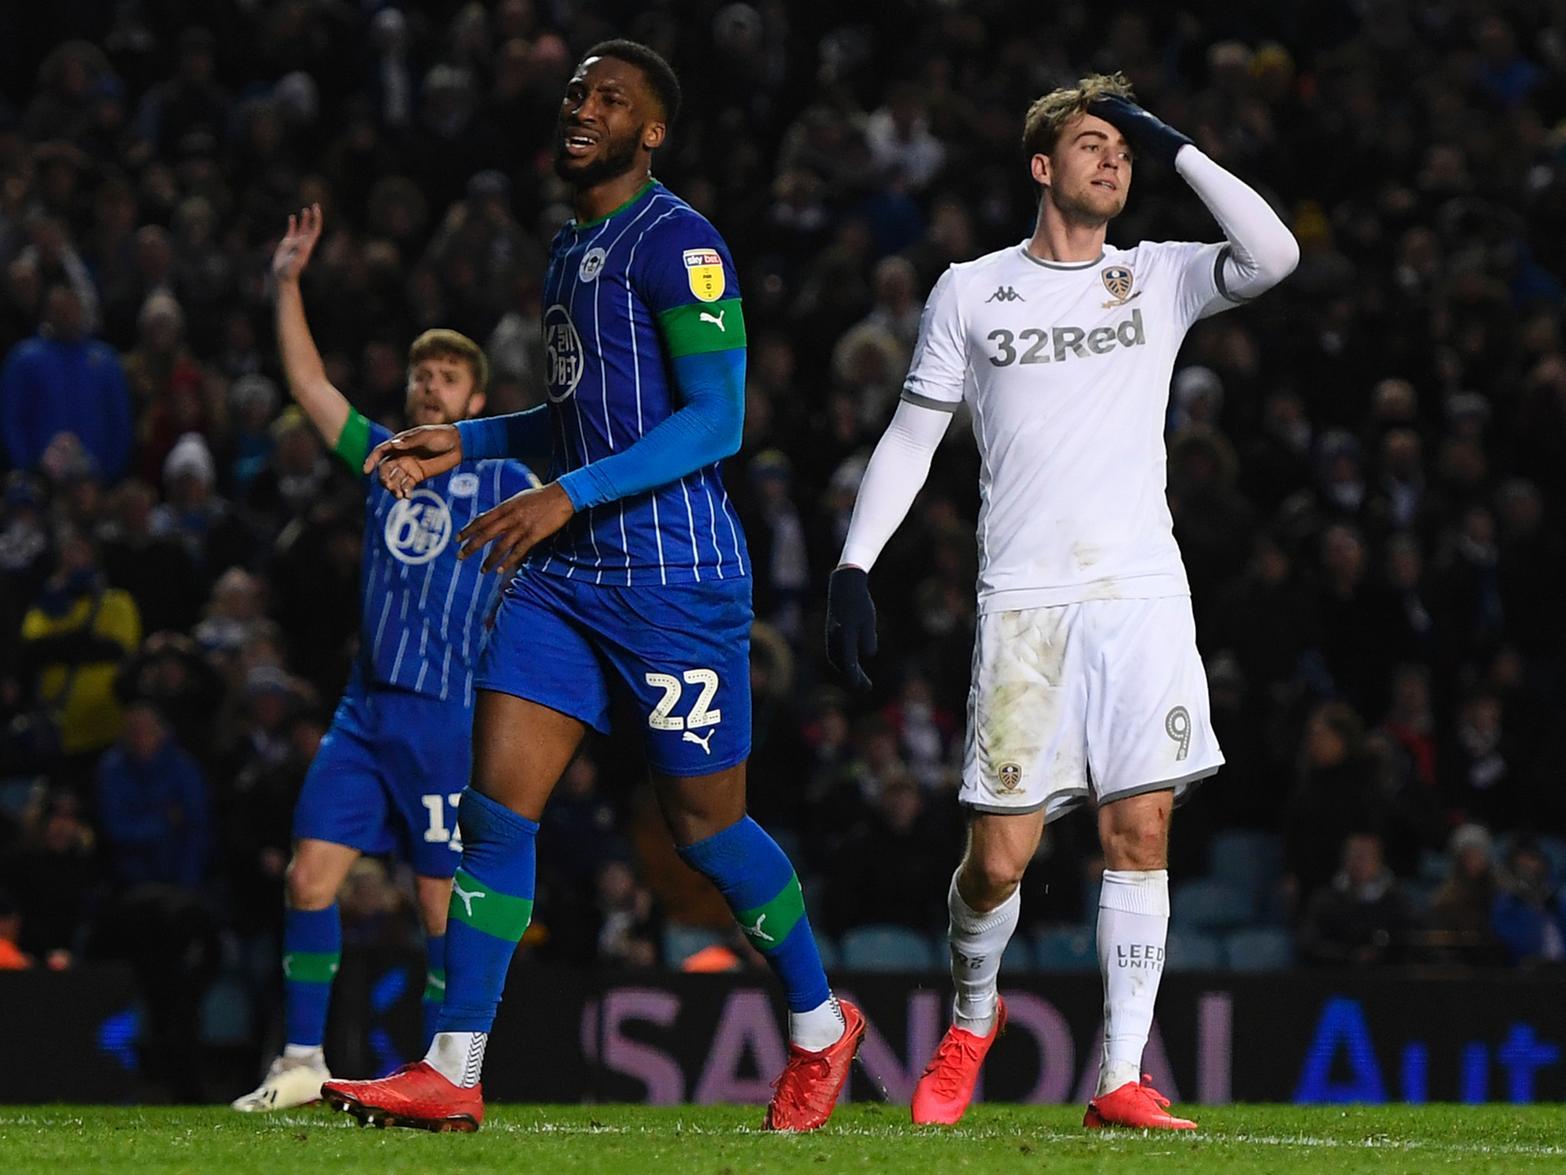 Former Leeds United goalkeeper Paul Robinson has branded Leeds United striker Patrick Bamford as "wayward and wasteful", after he failed to take some key matches against Wigan last weekend. (Football Insider)